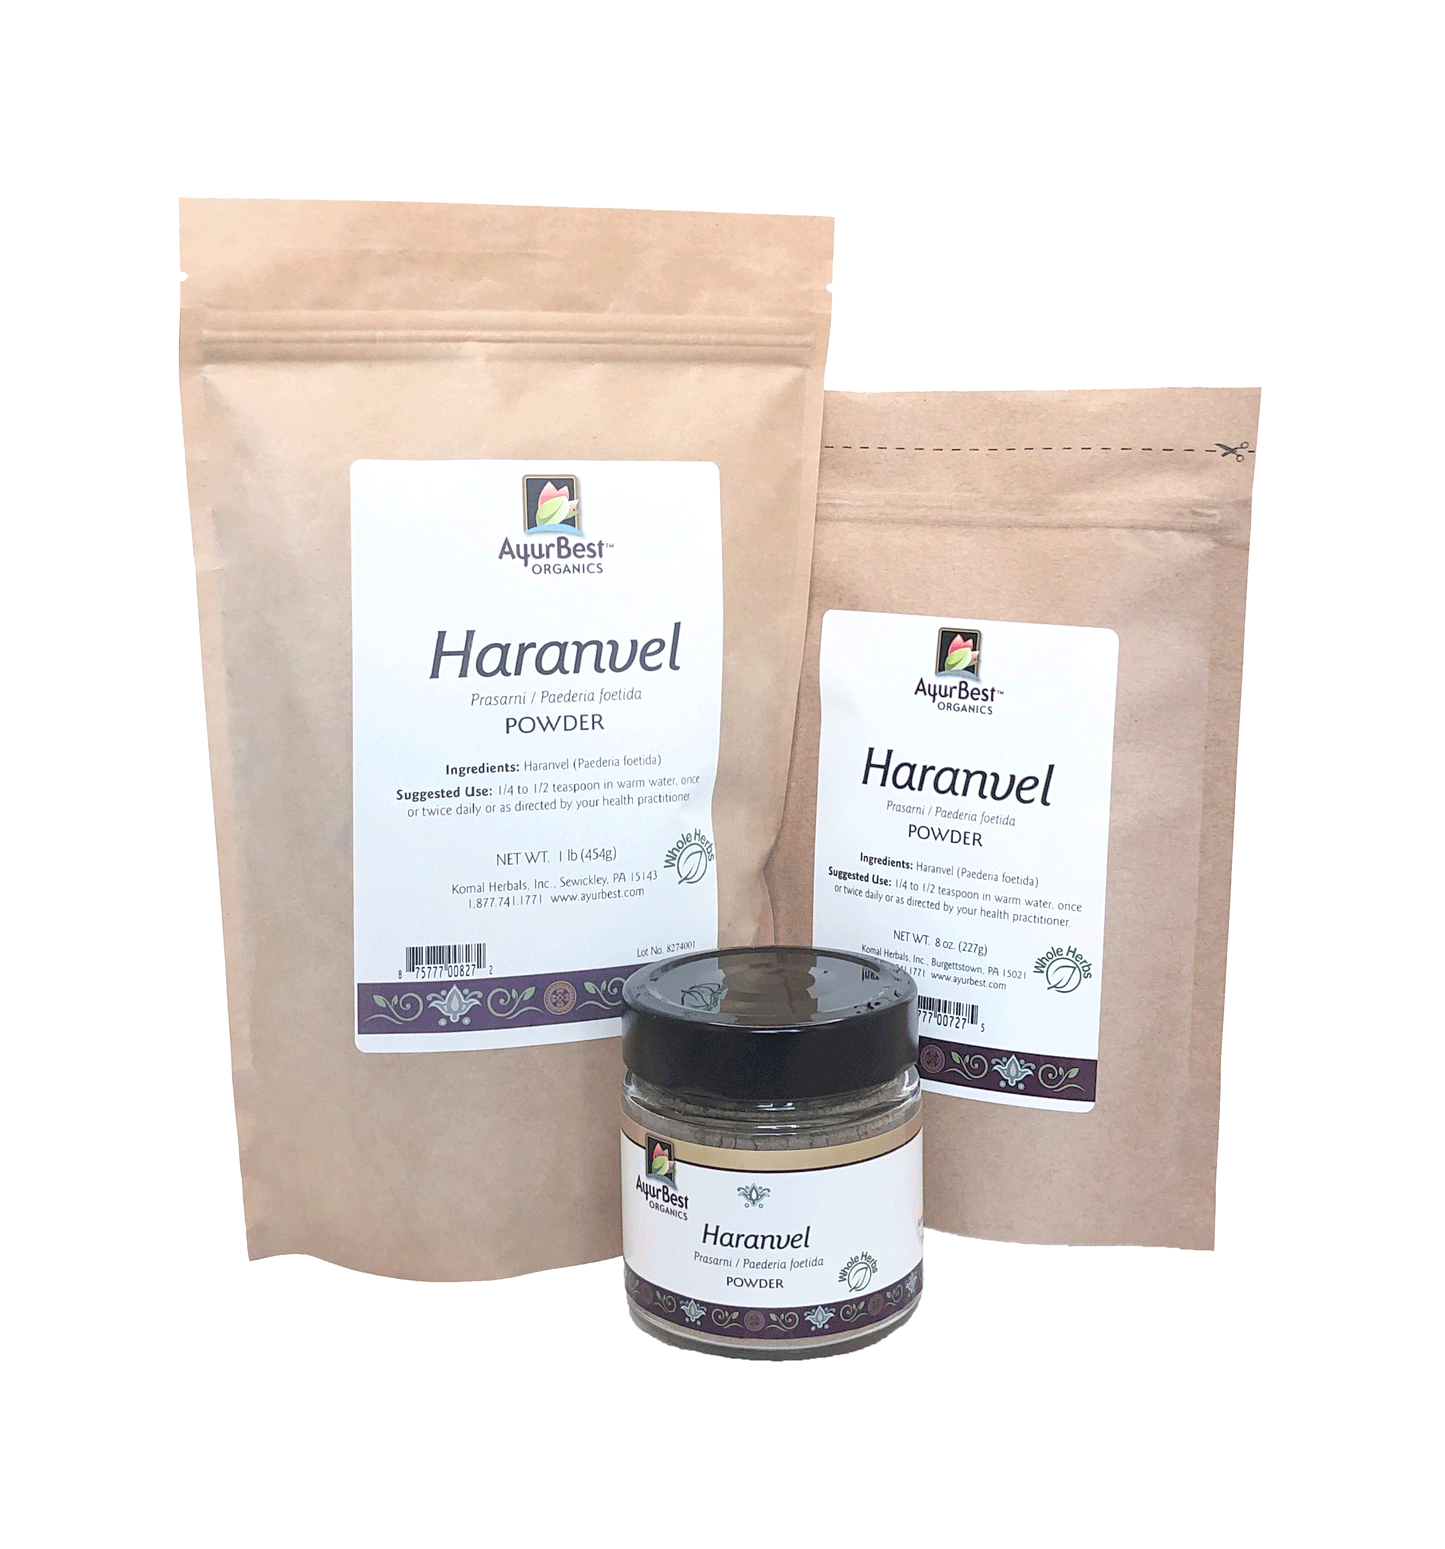 Buy Organic Haranvel Powder available in 3 great sizes!